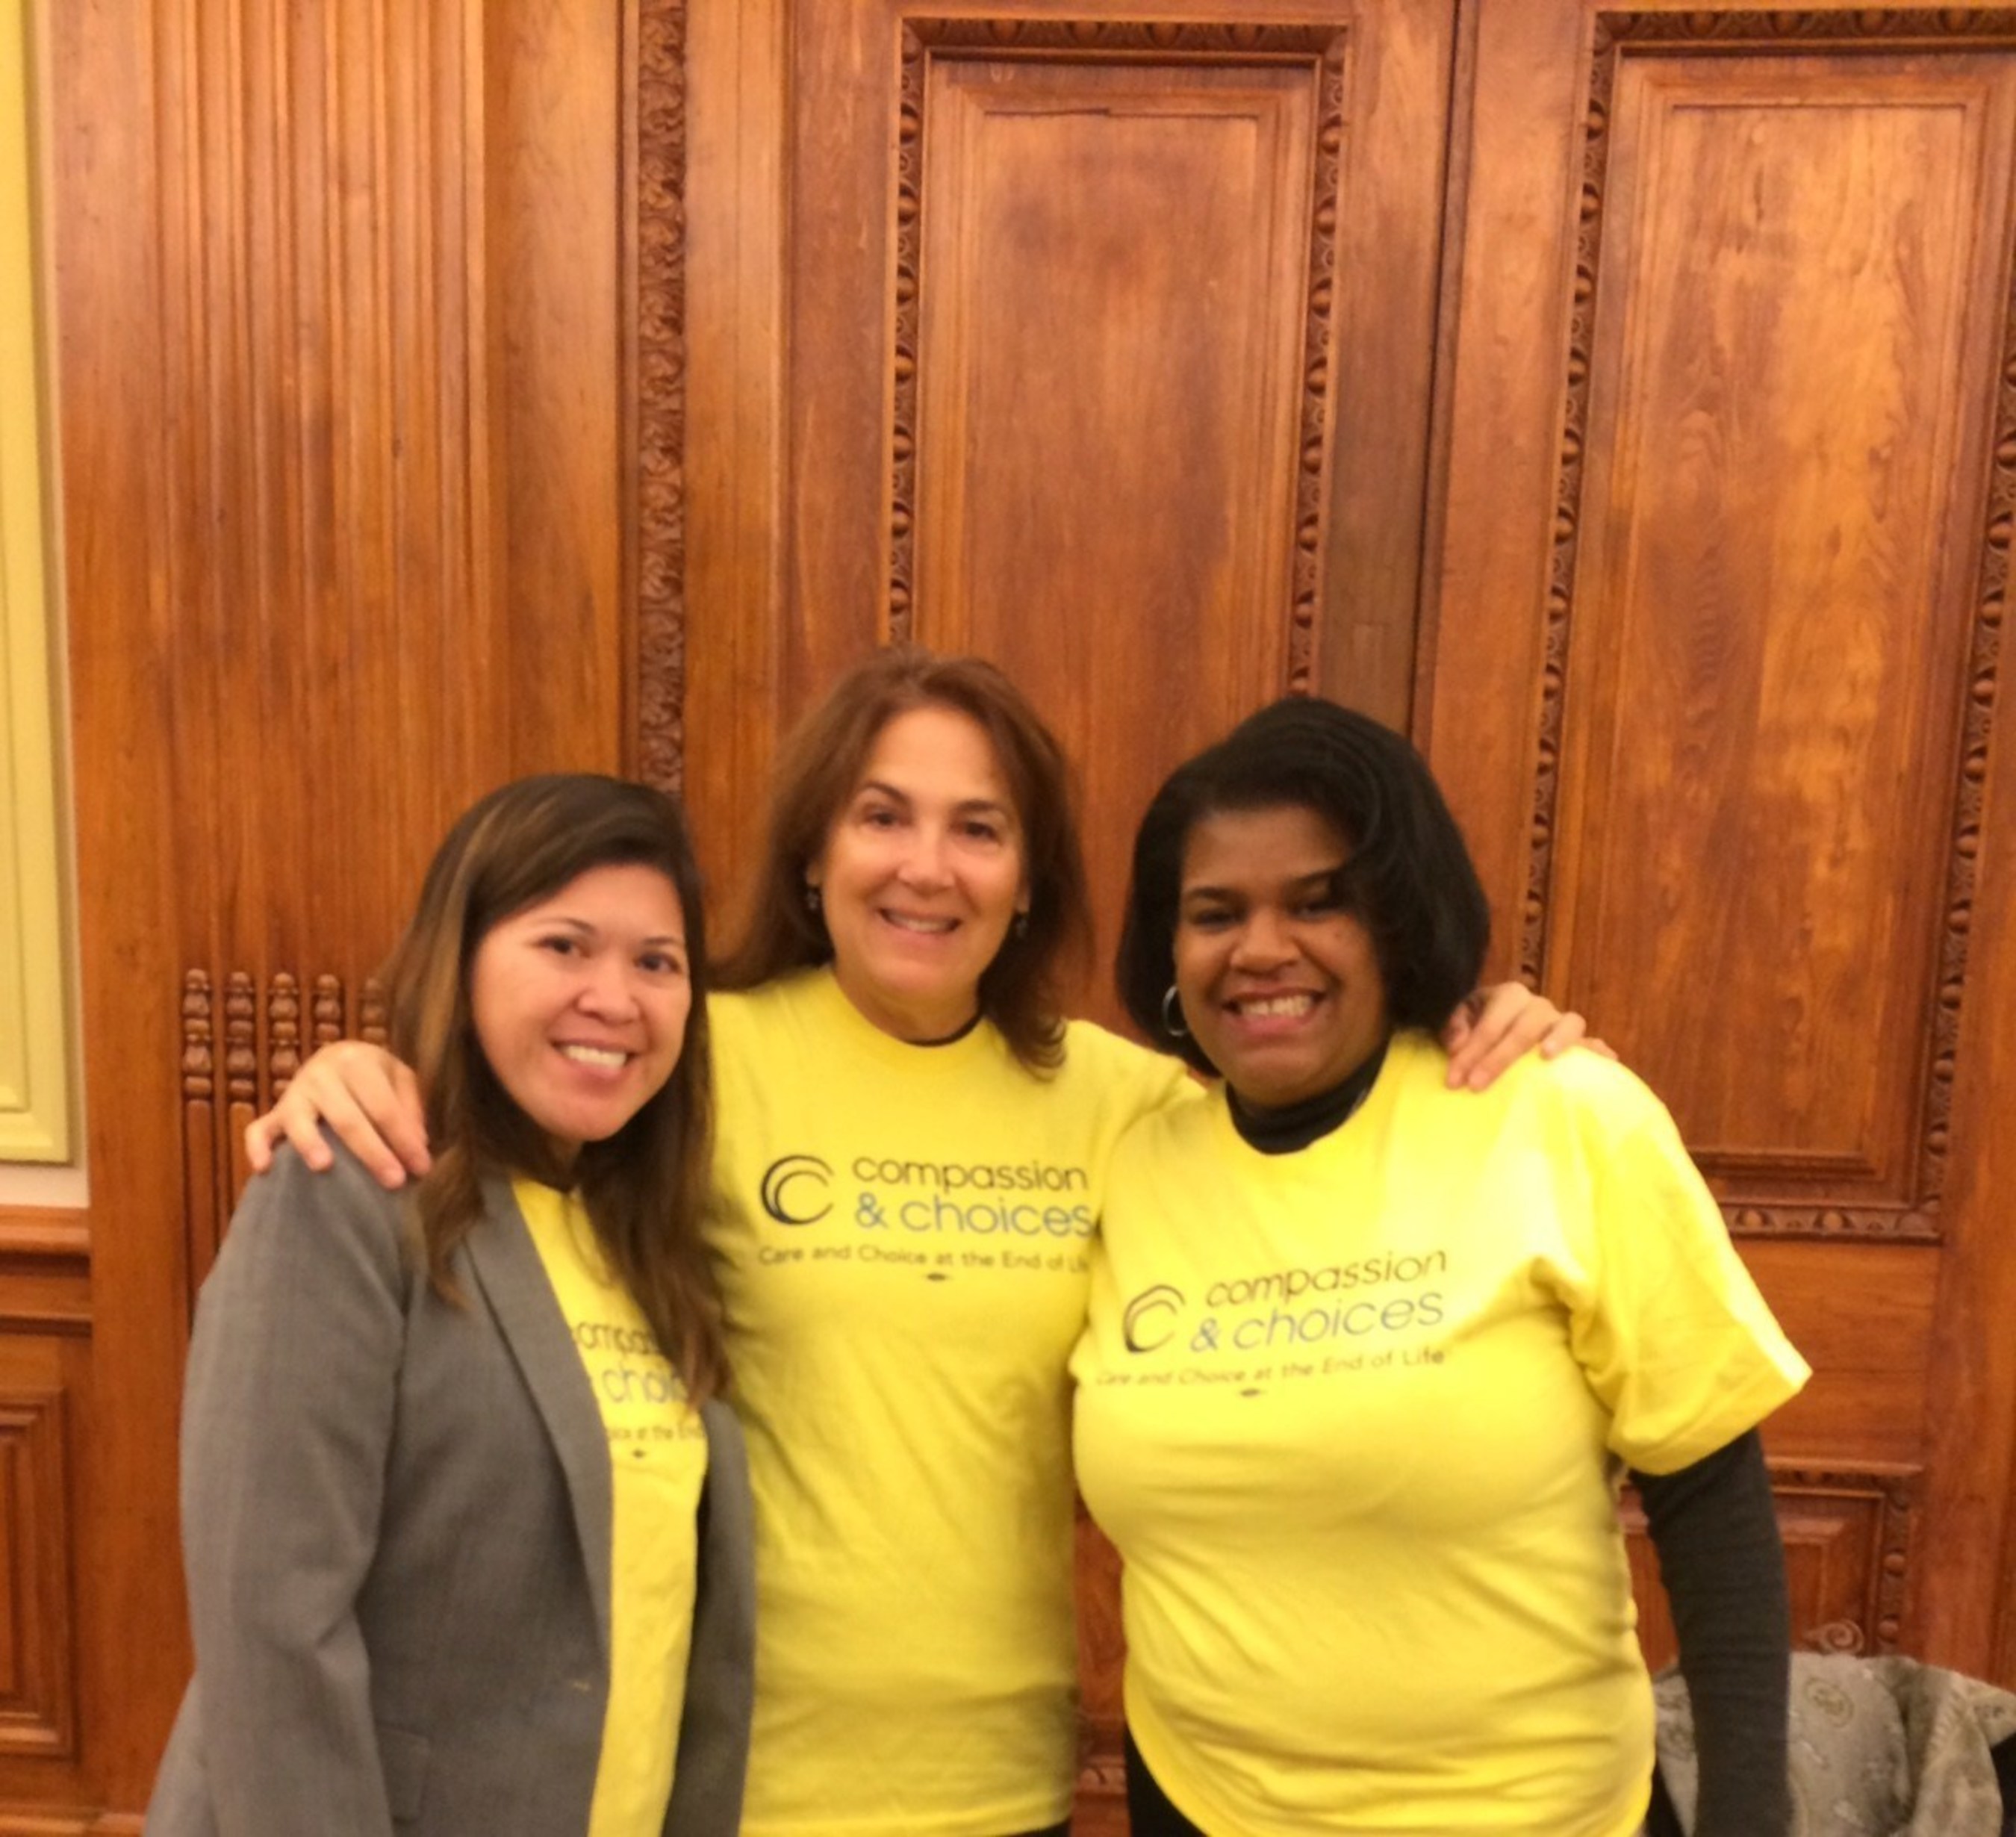 Compassion & Choices Political Director Charmaine Manansala, Compassion & Choices  volunteer Gwen Fitzgerald, Compassion & Choices D.C. Legislative and Field Manager Donna Smith at the D.C. Council